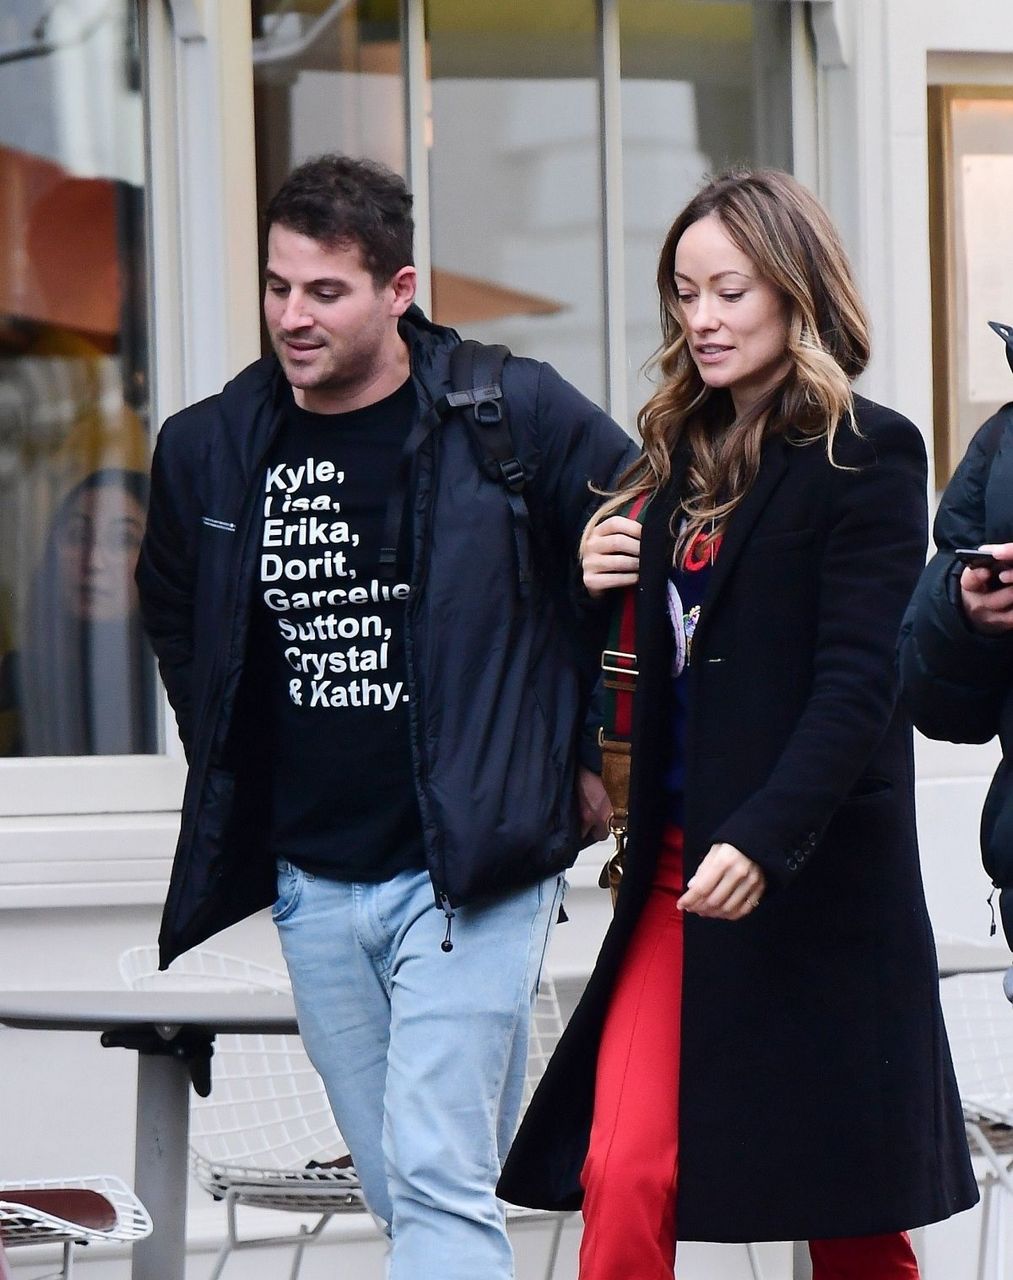 Olivia Wilde Out For Lunch With Friend London